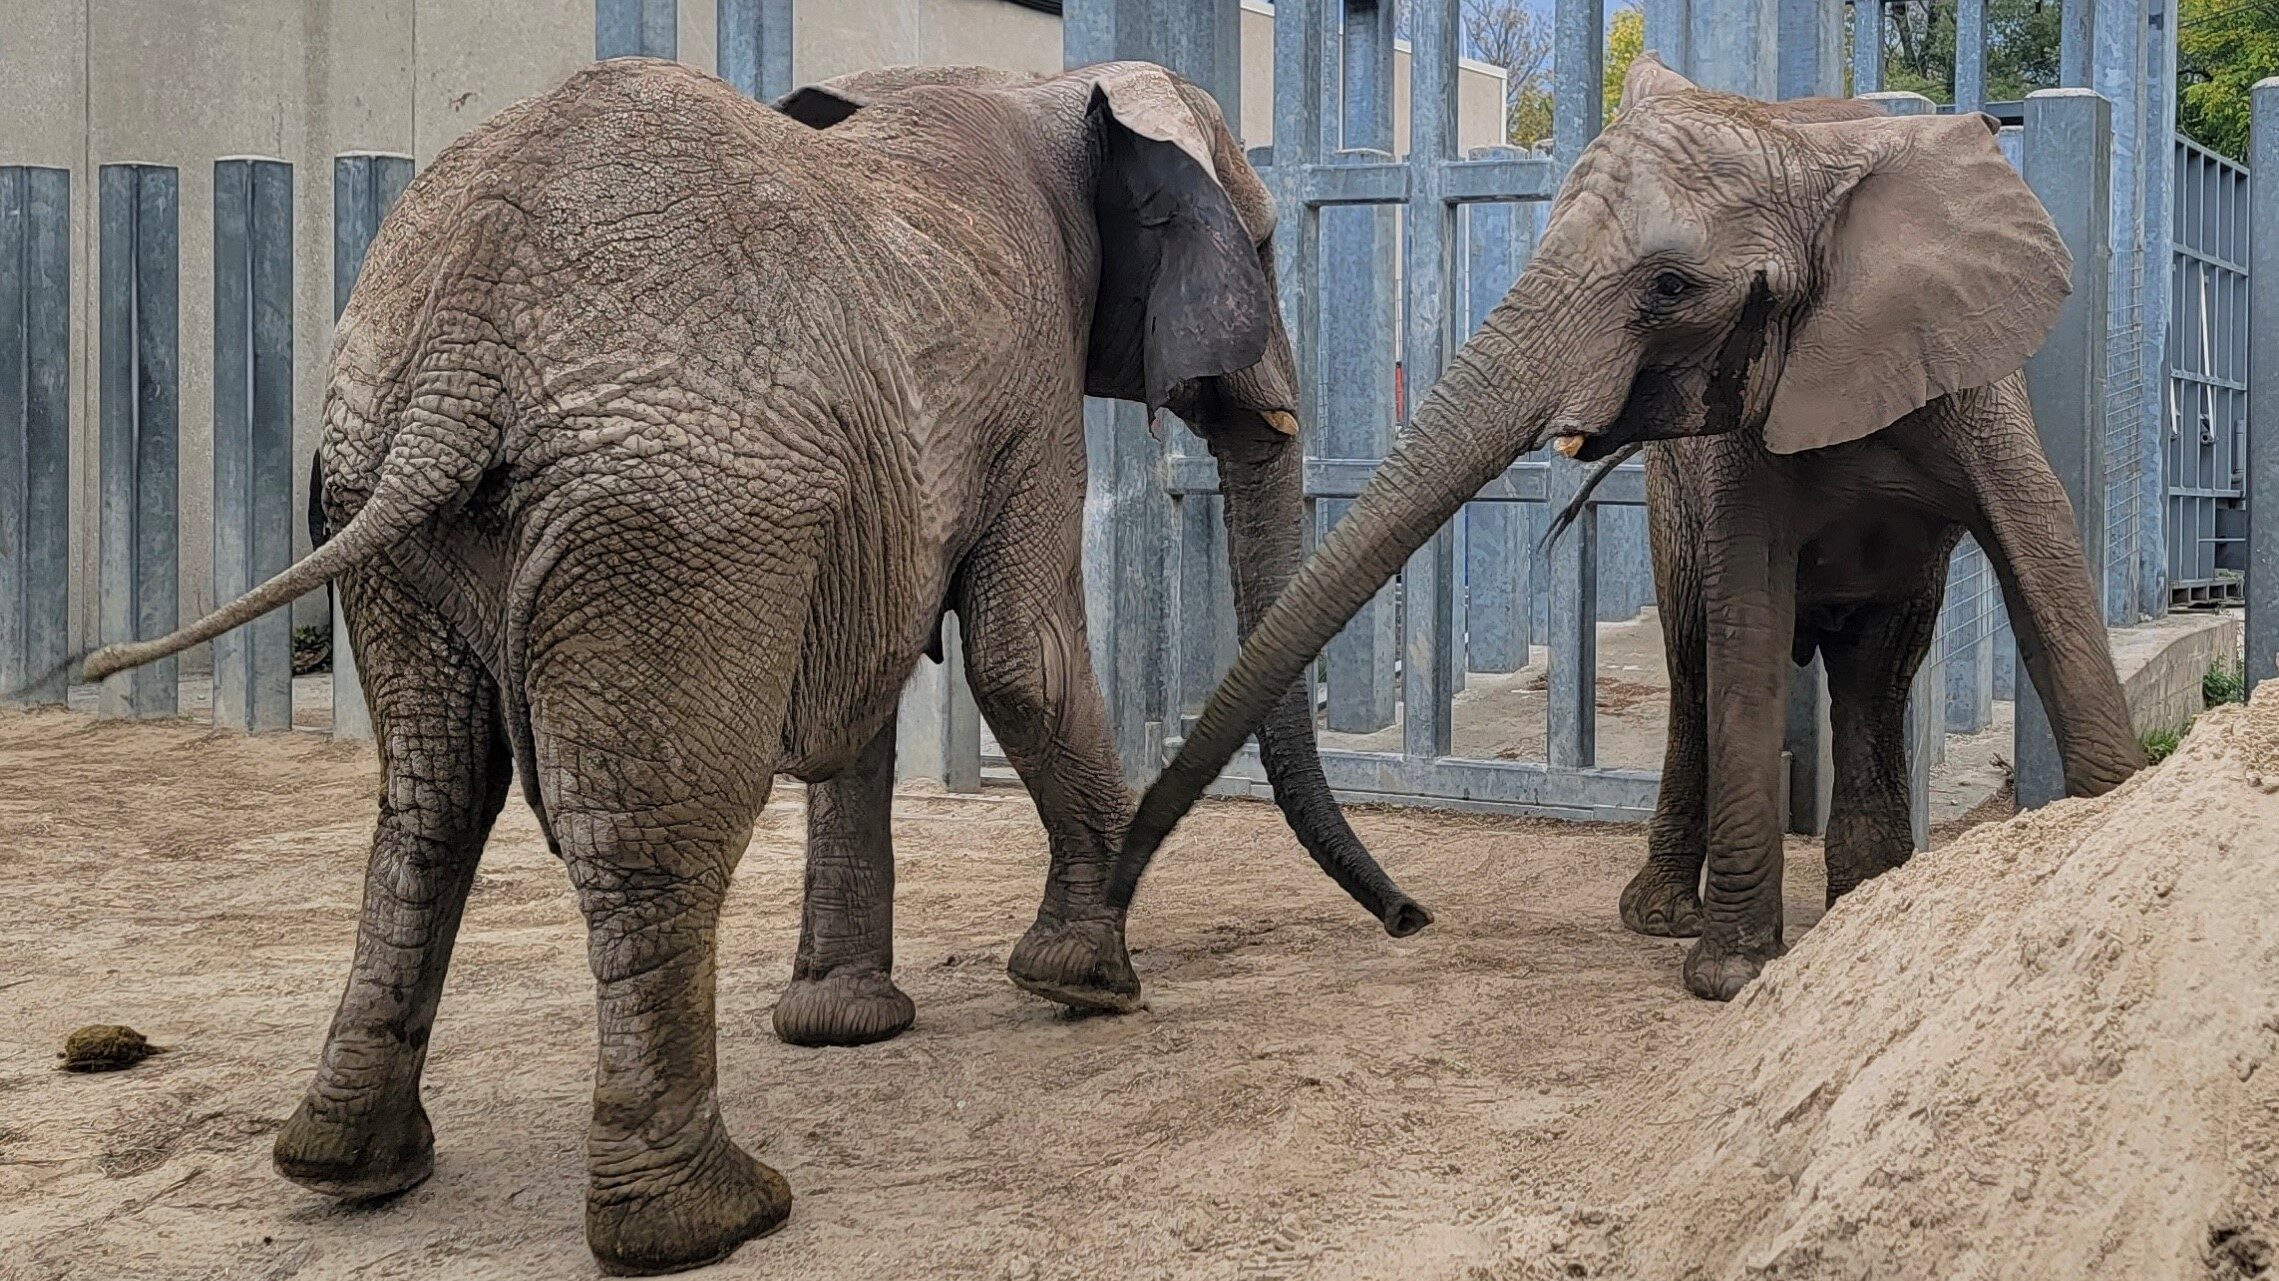 Christie and Zuri, formerly of the Utah Hogle Zoo, arrive safely at the Kansas City Zoo in Missouri...